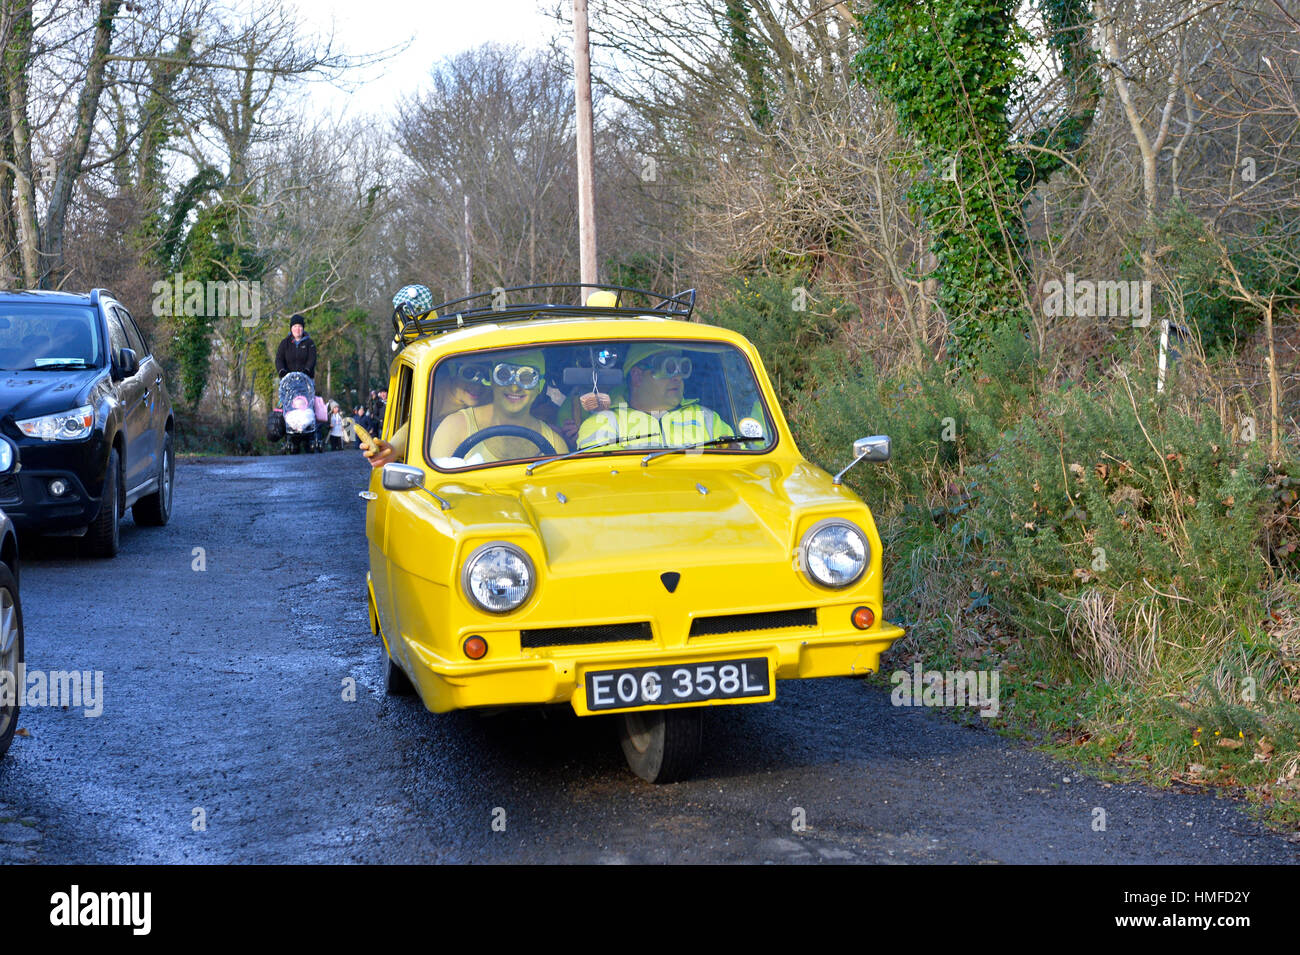 Replica of the Trotters yellow Reliant Regal van in County Donegal Ireland Stock Photo